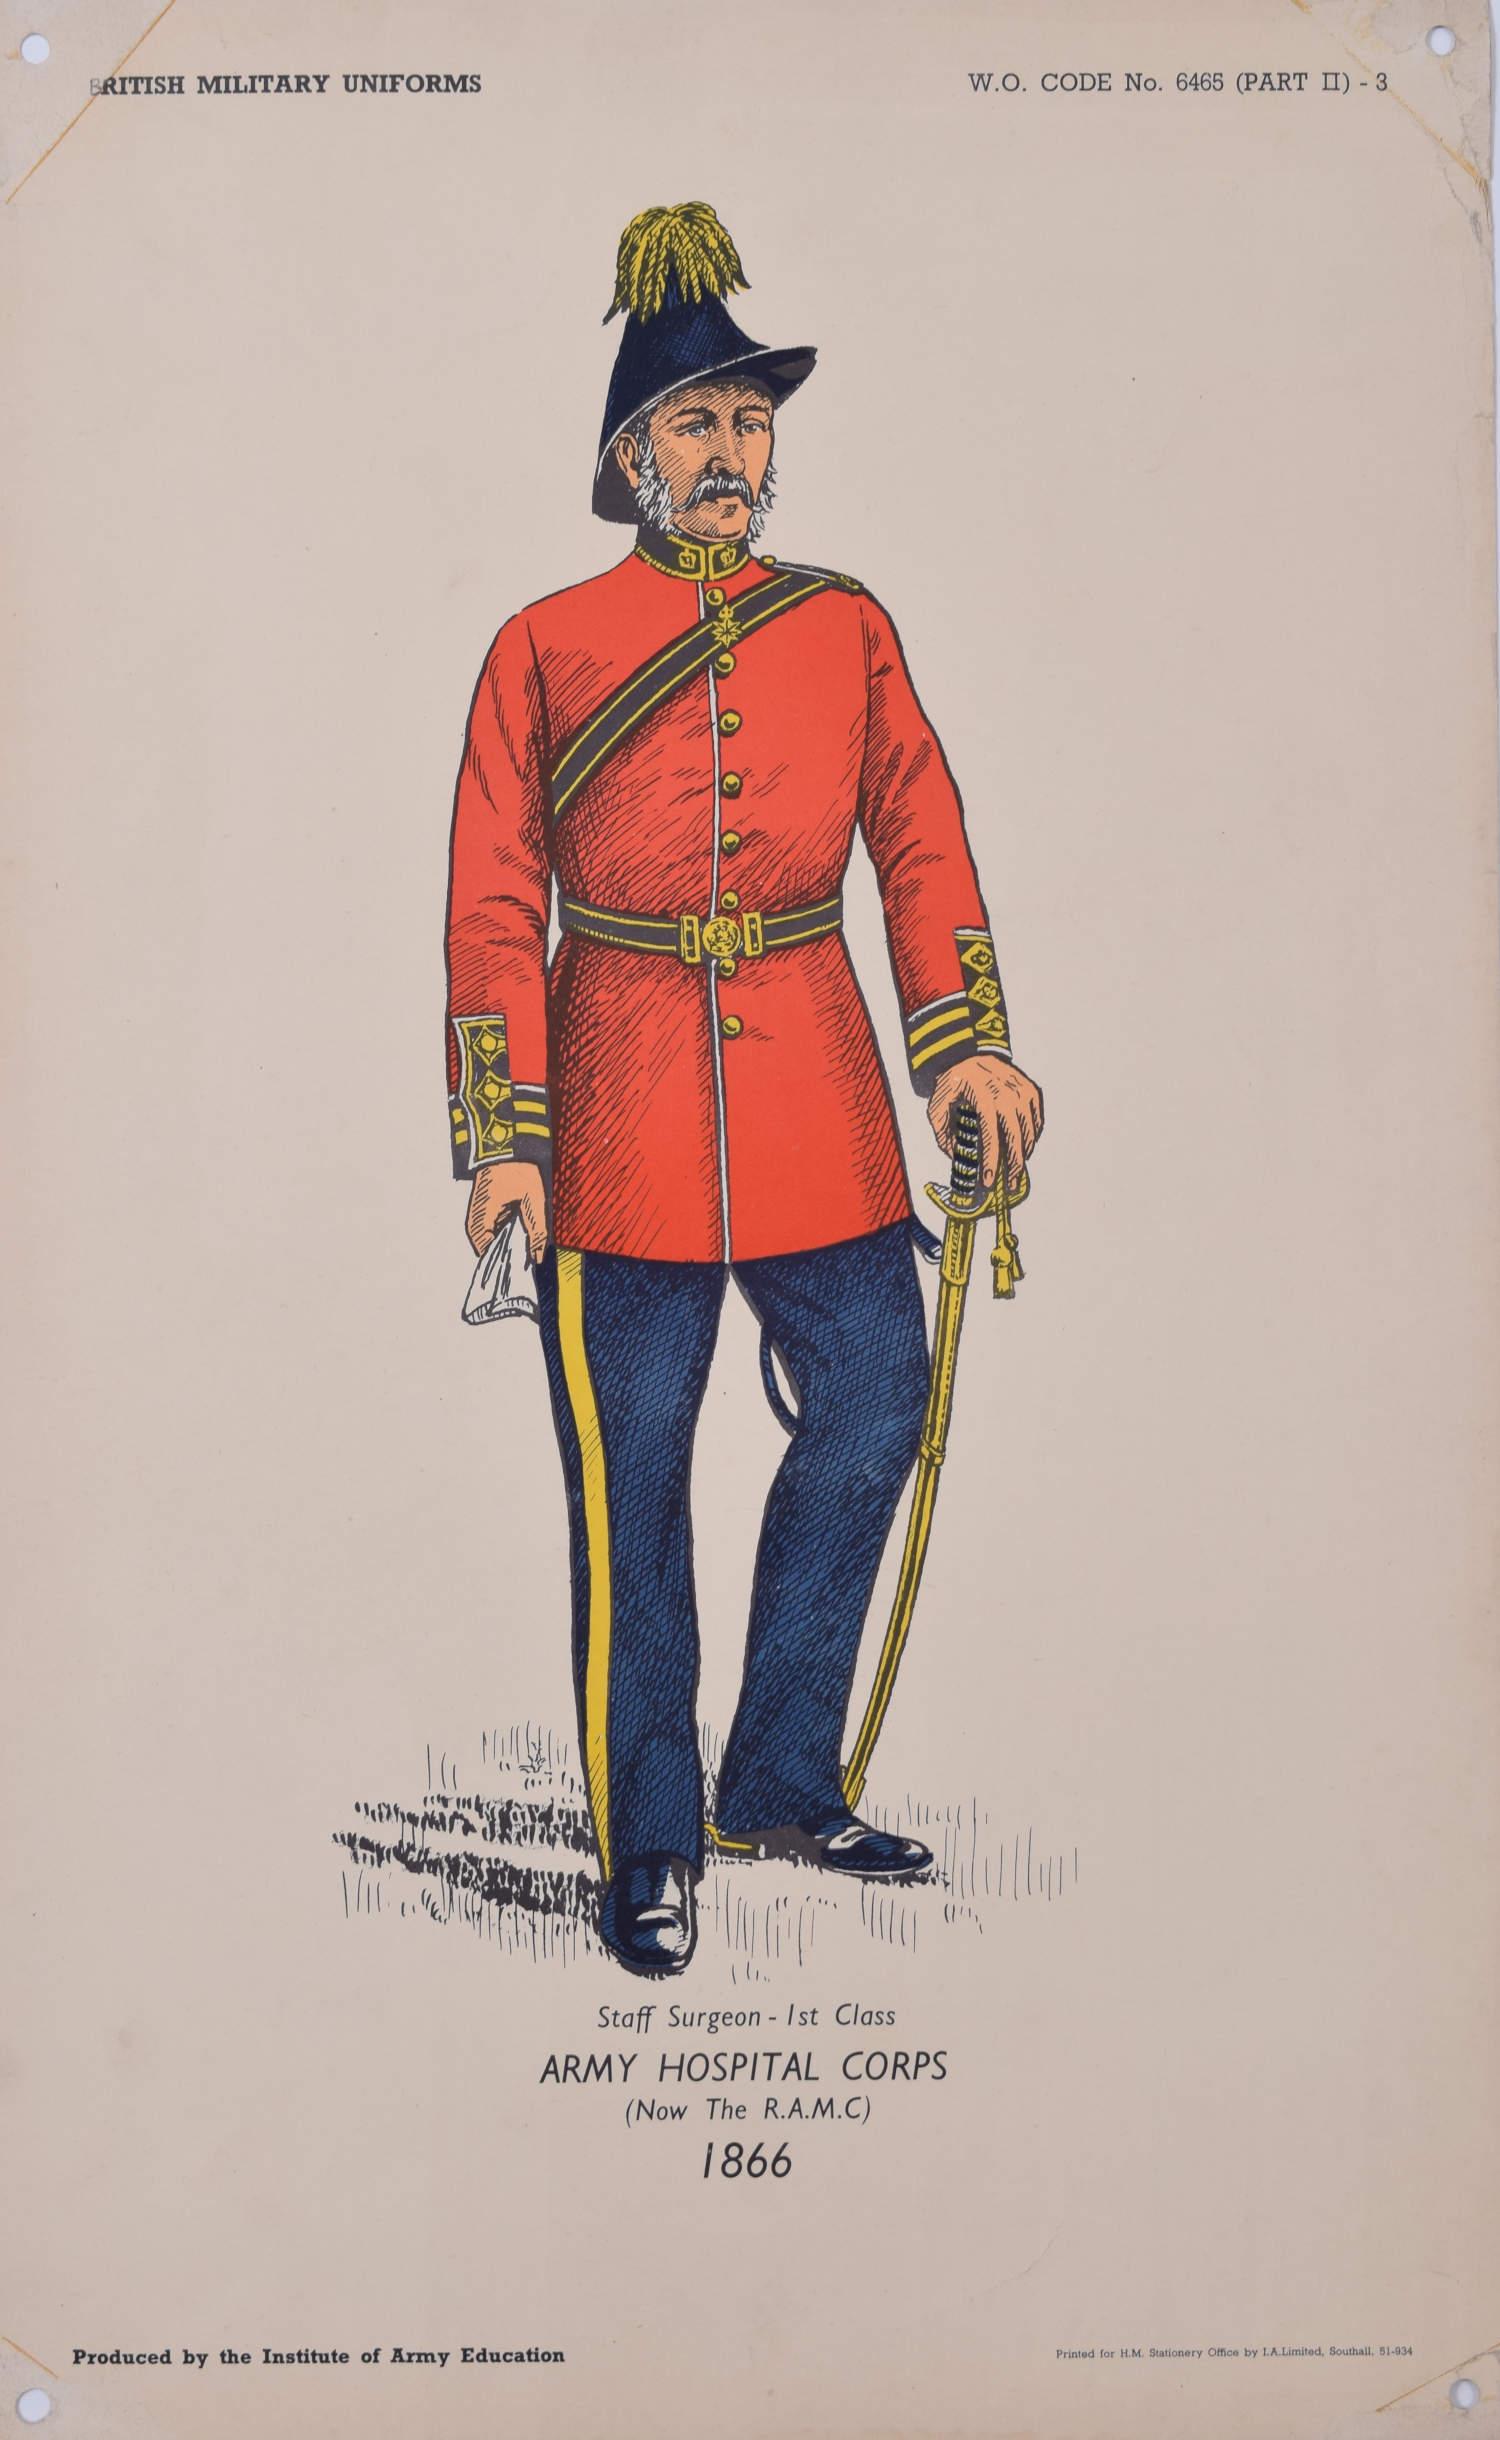 Unknown Portrait Print - 9th Queen's Royal Lancers Officer Institute of Army Education uniform lithograph